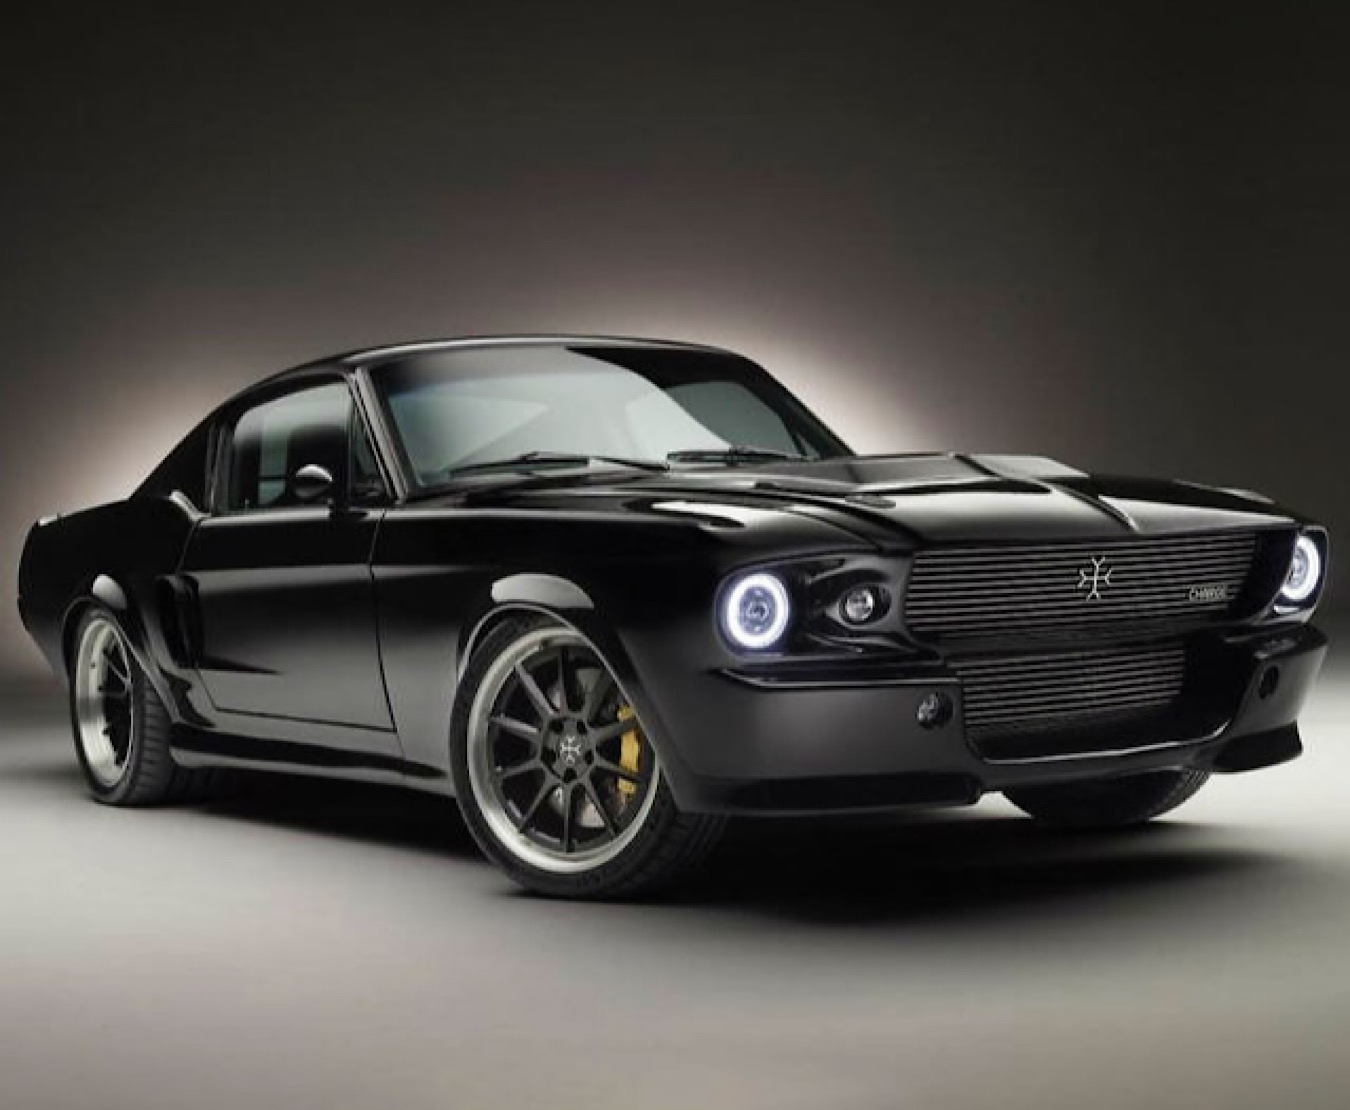 Charge Cars All-Electric 1967 Mustang Fastback black luxury vehicle